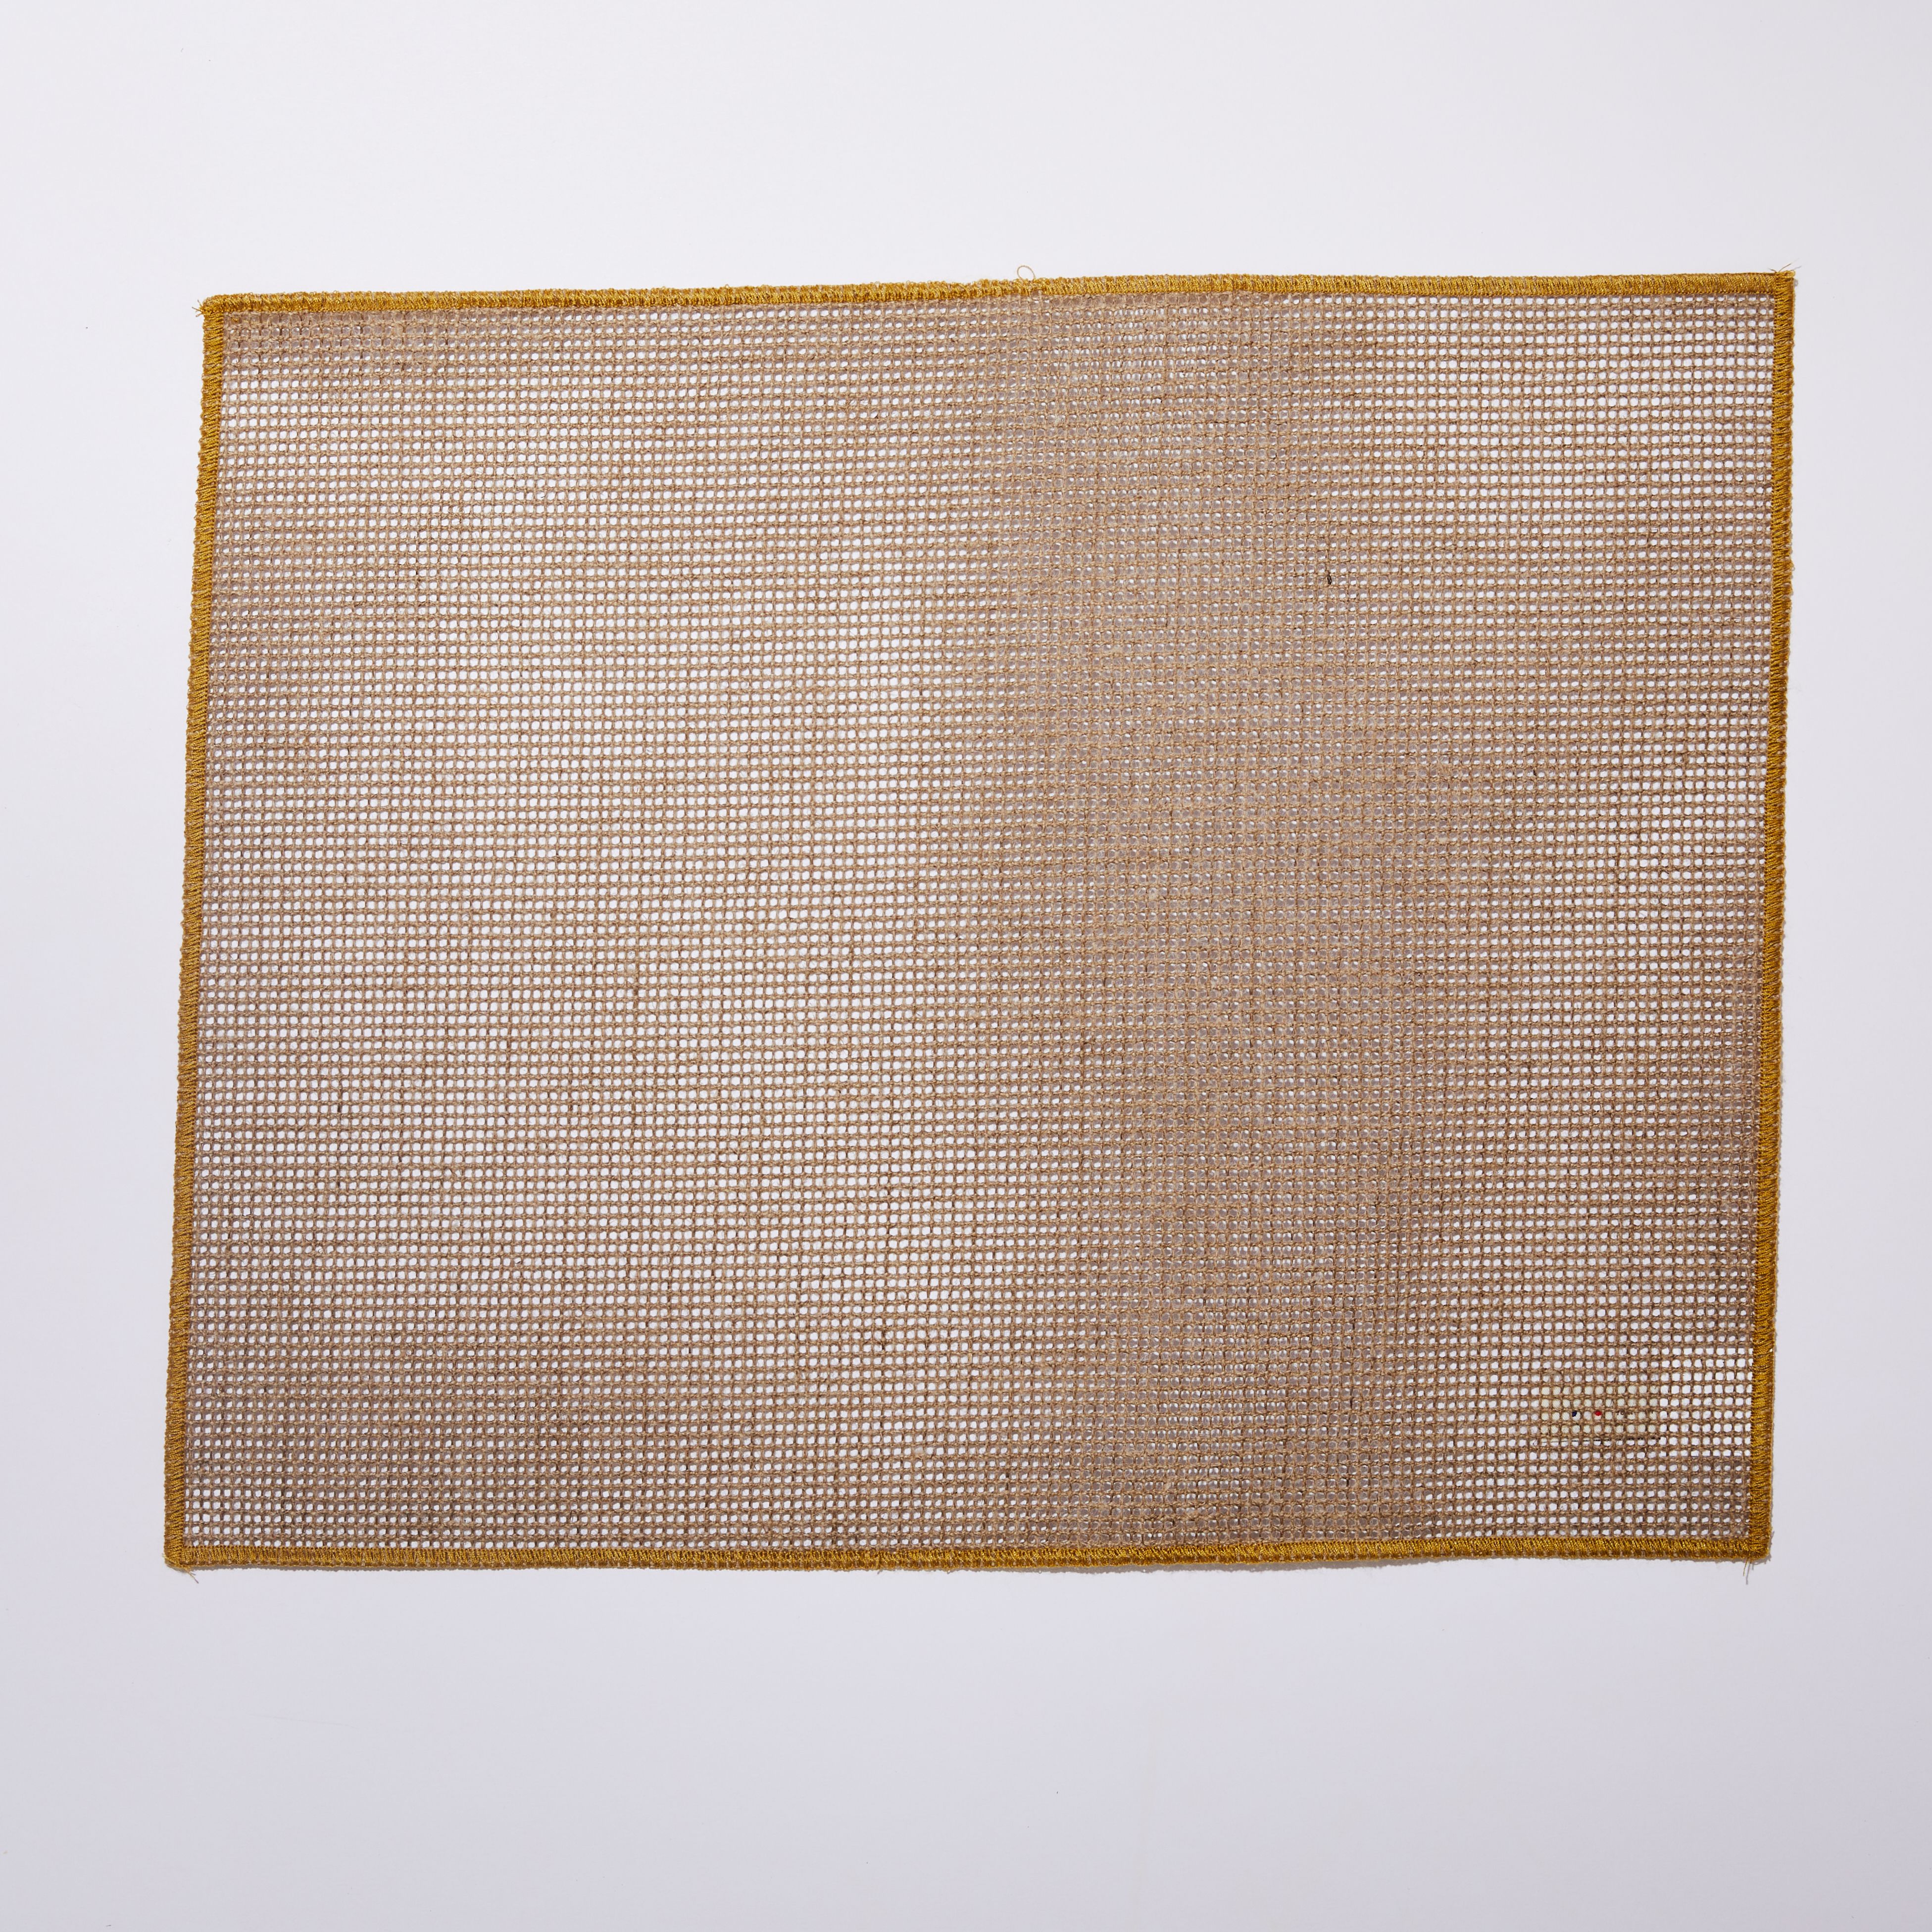 Quadrille Placemat with mustard yellow border